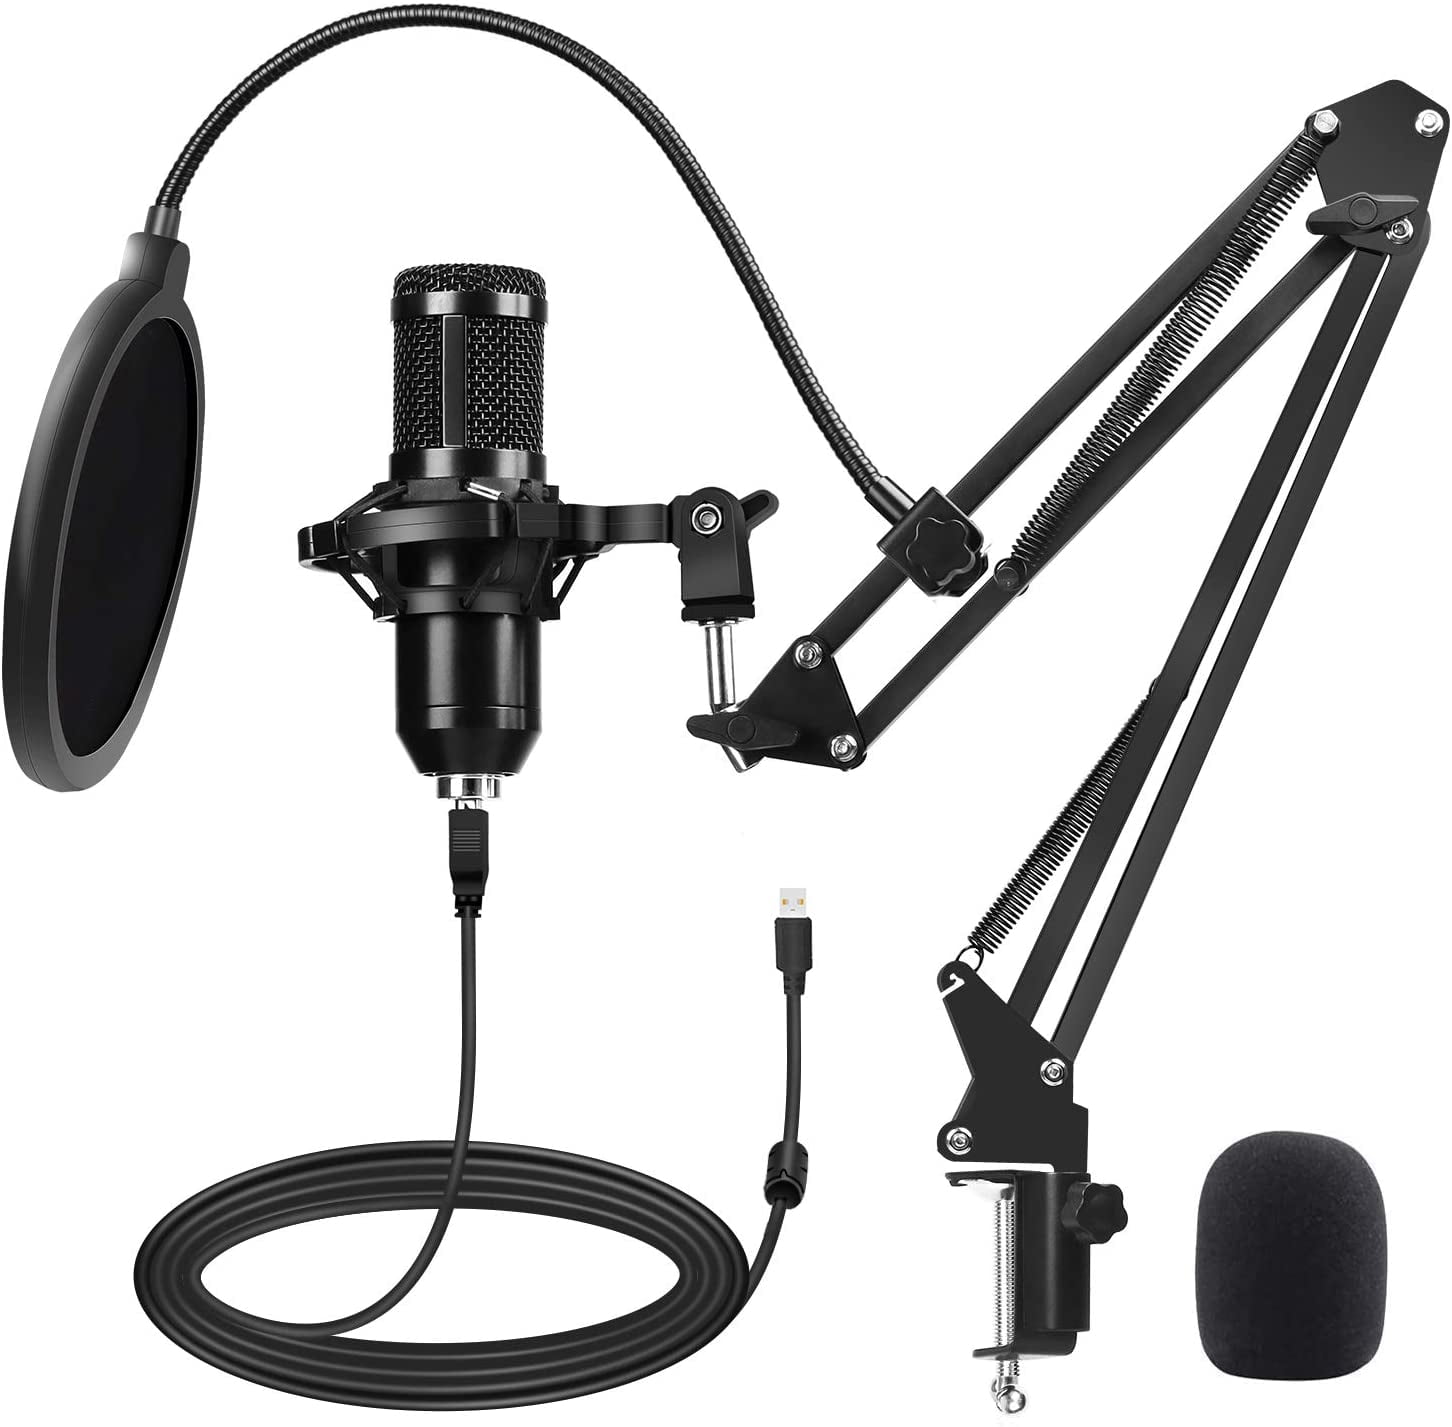 192KHz/24BIT Plug & Play Professional Cardioid Condenser Streaming Mic with Boom Arm Metal Shock Mount Delam USB Studio Podcast Gaming Microphone Kit Pop Filter for Vocal Music Recording PC Youtube 